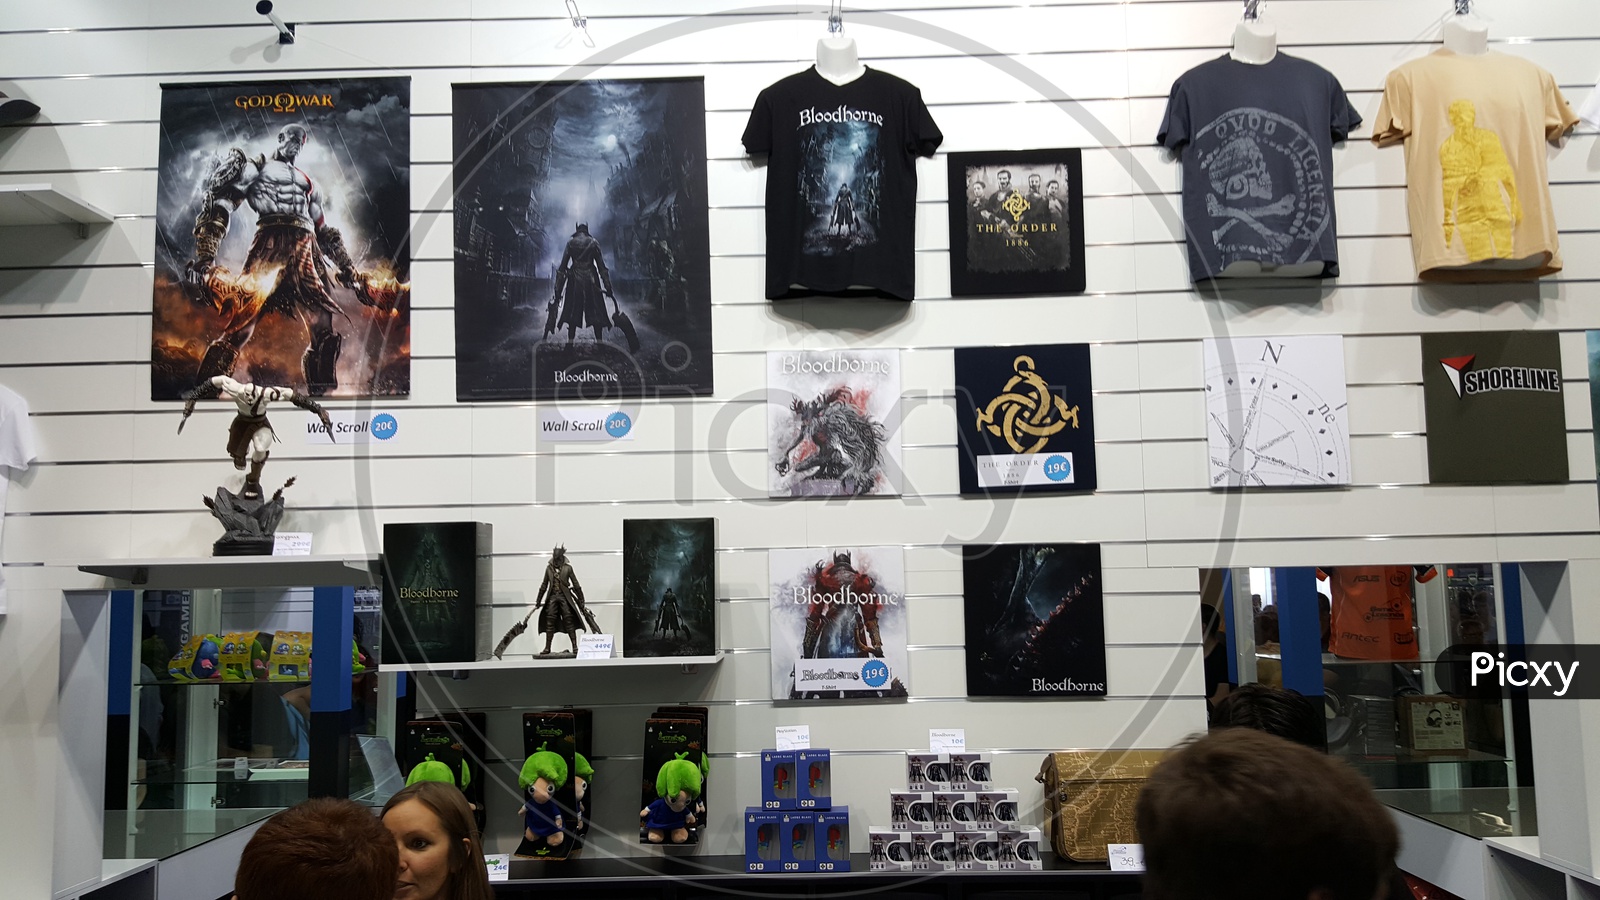 Printed T-shirts and Toys for Gamer's at Gamescom, Cologne